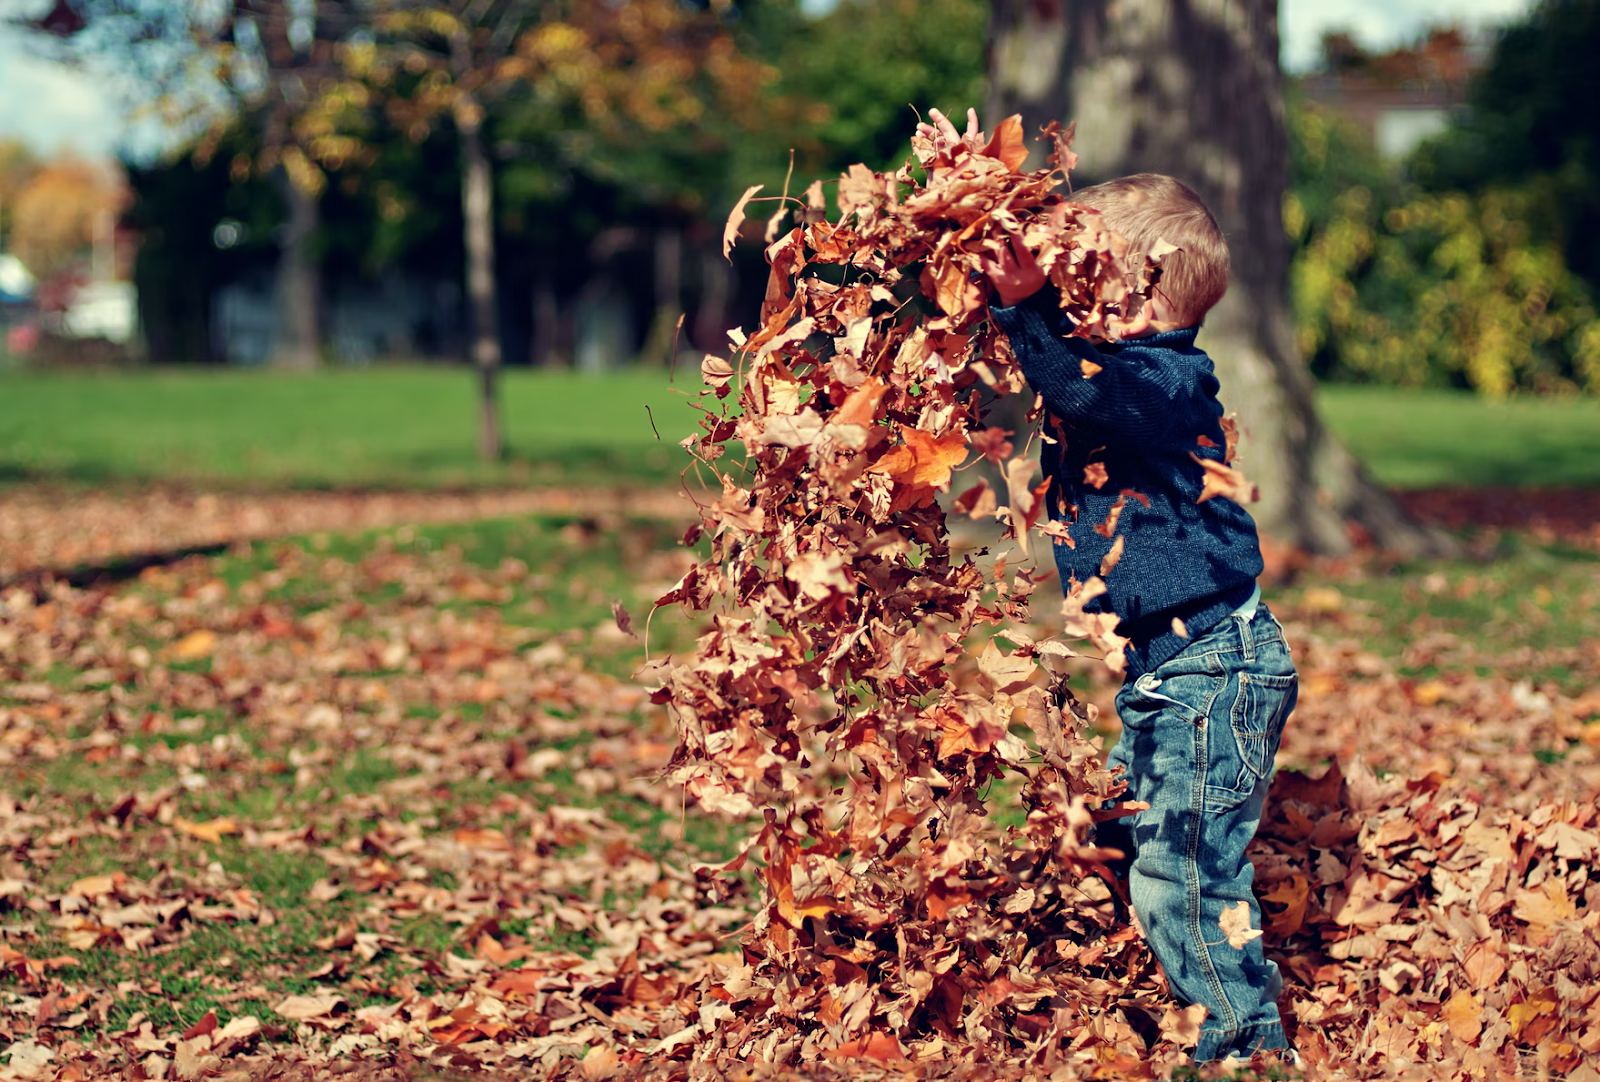 Hyperactive child with ADHD playing with leaves